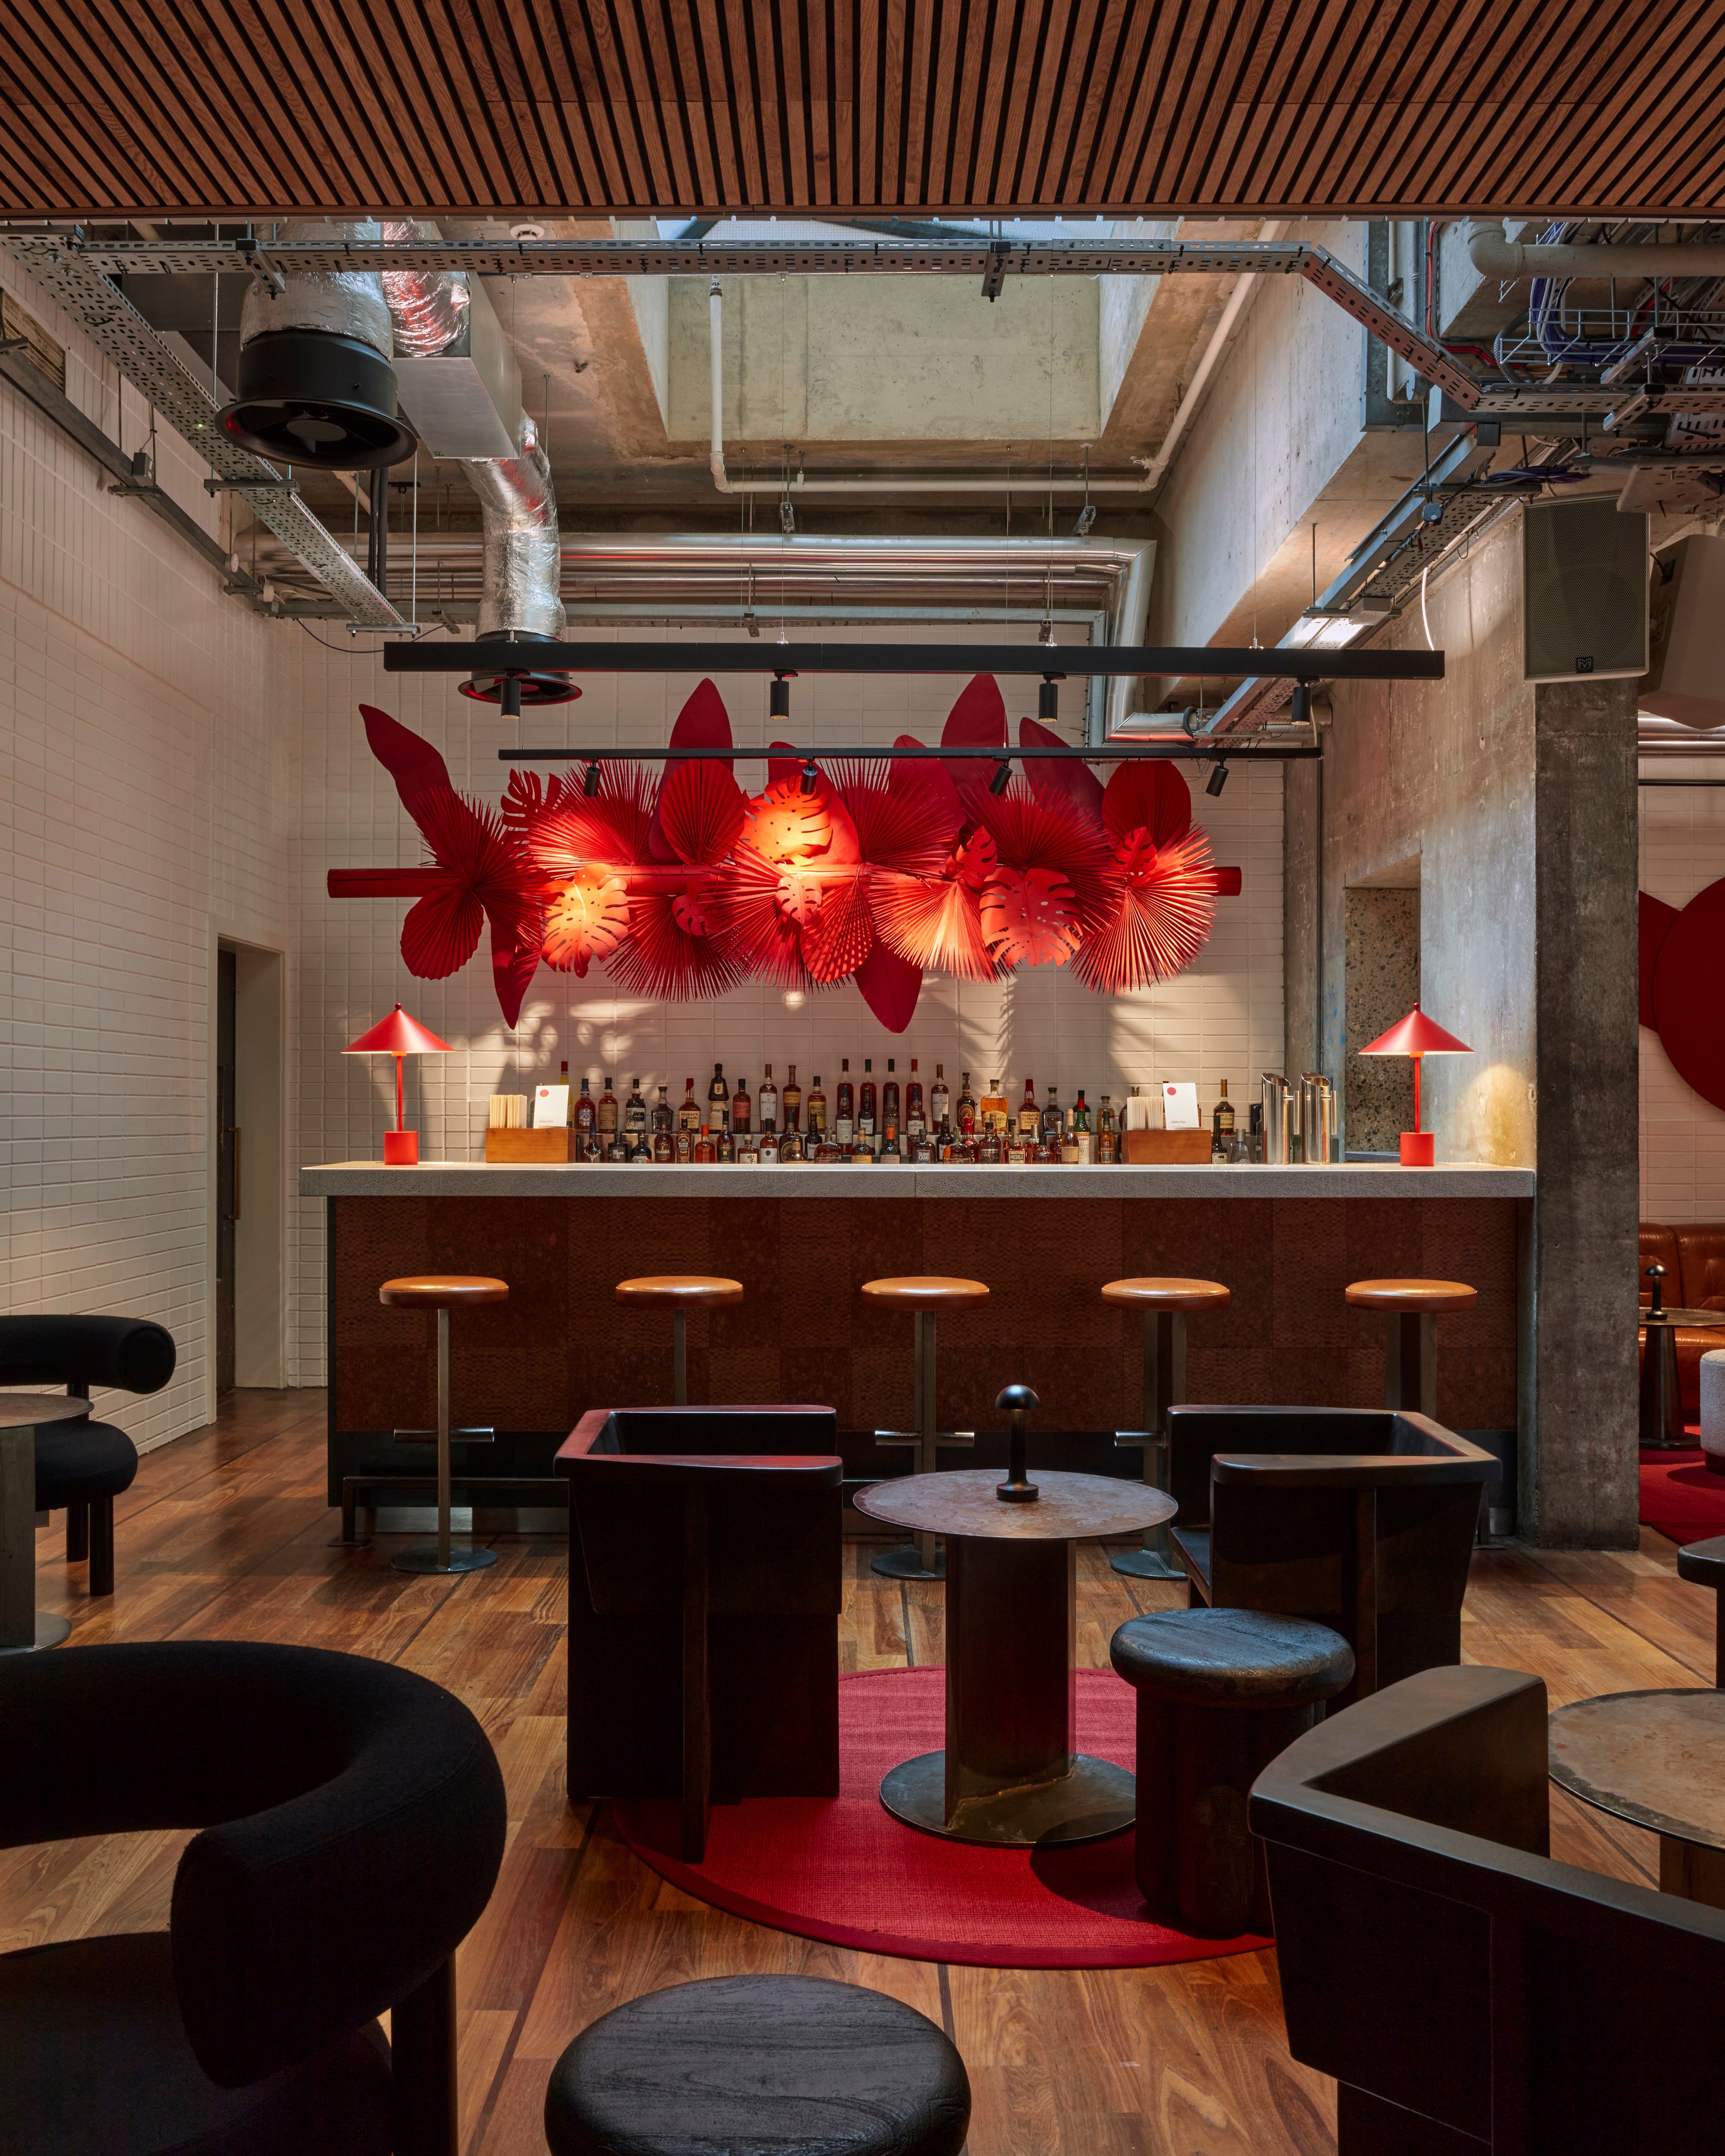 The striking centerpiece of the Lobby Bar at One Hundred Shoreditch Hotel, an impressive giant paper artwork in flamboyant red, adorned with intricately crafted tropical leaves.